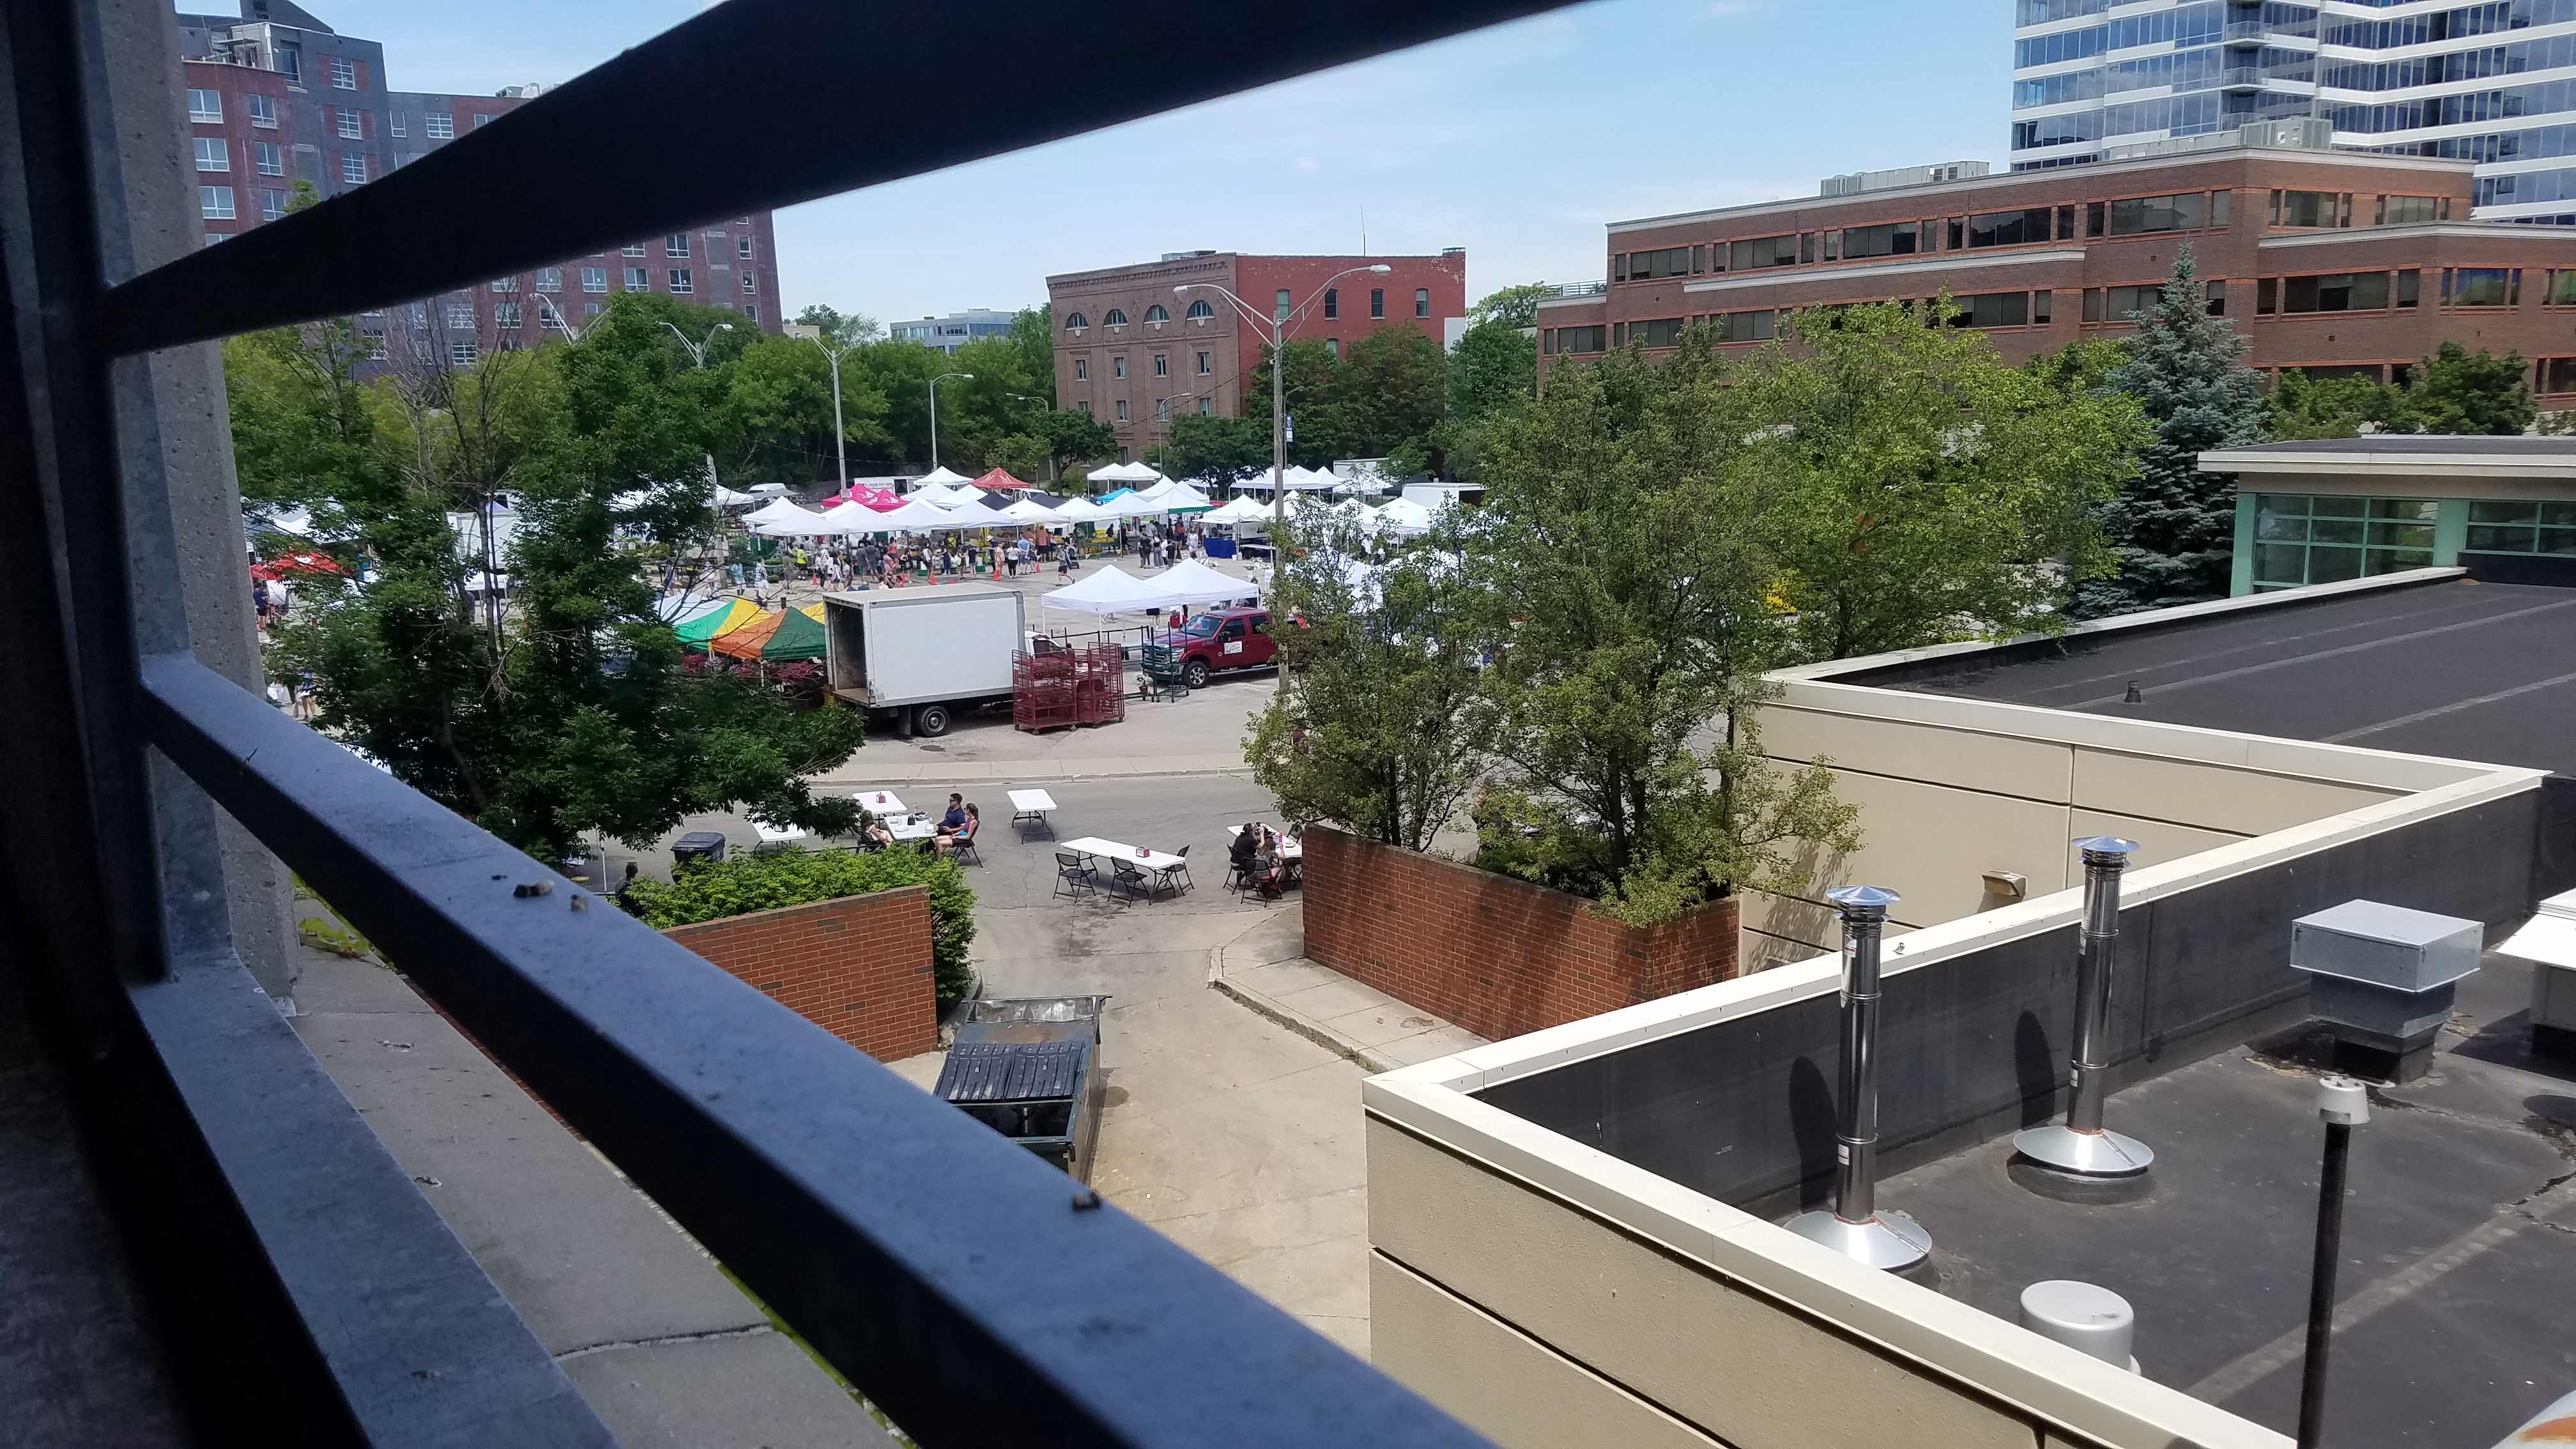 The Vendor Slate for the 2023-2024 Market Season is Set, and it all begins on Saturday, May 6th